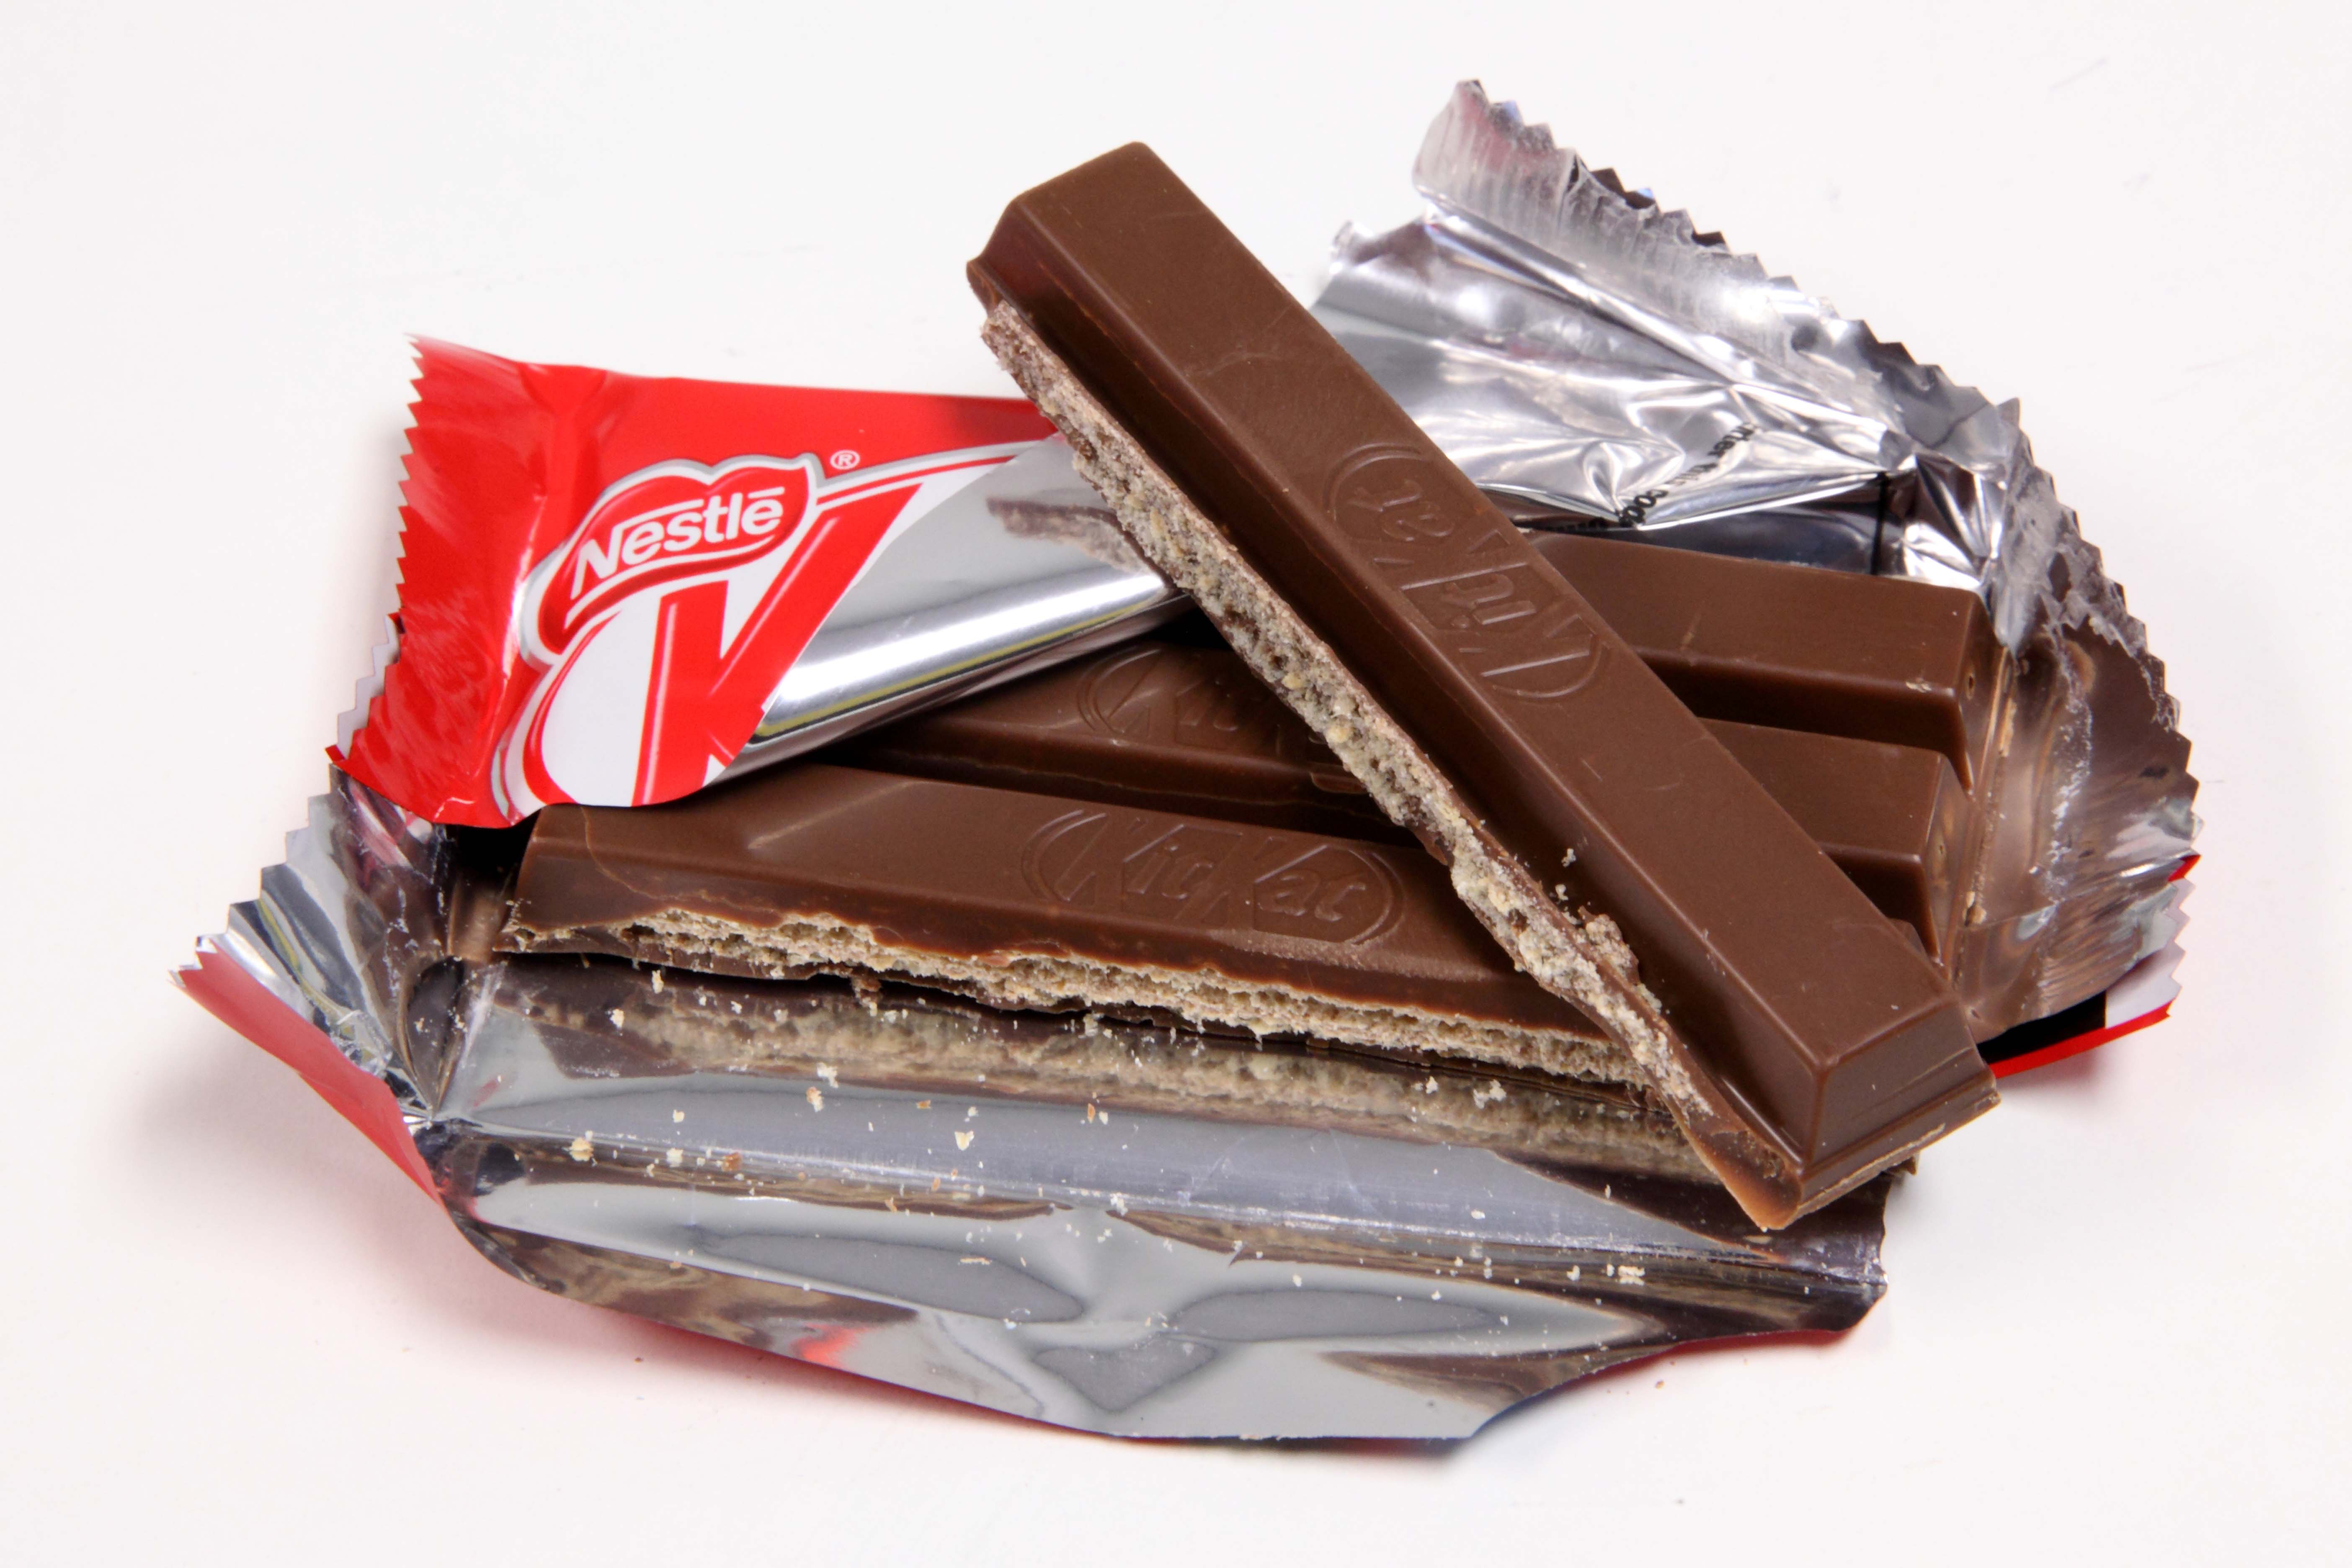 Kit Kat. Four fingers of crispy biscuit and Fair-Trade chocolate.  Too tempting to resist !